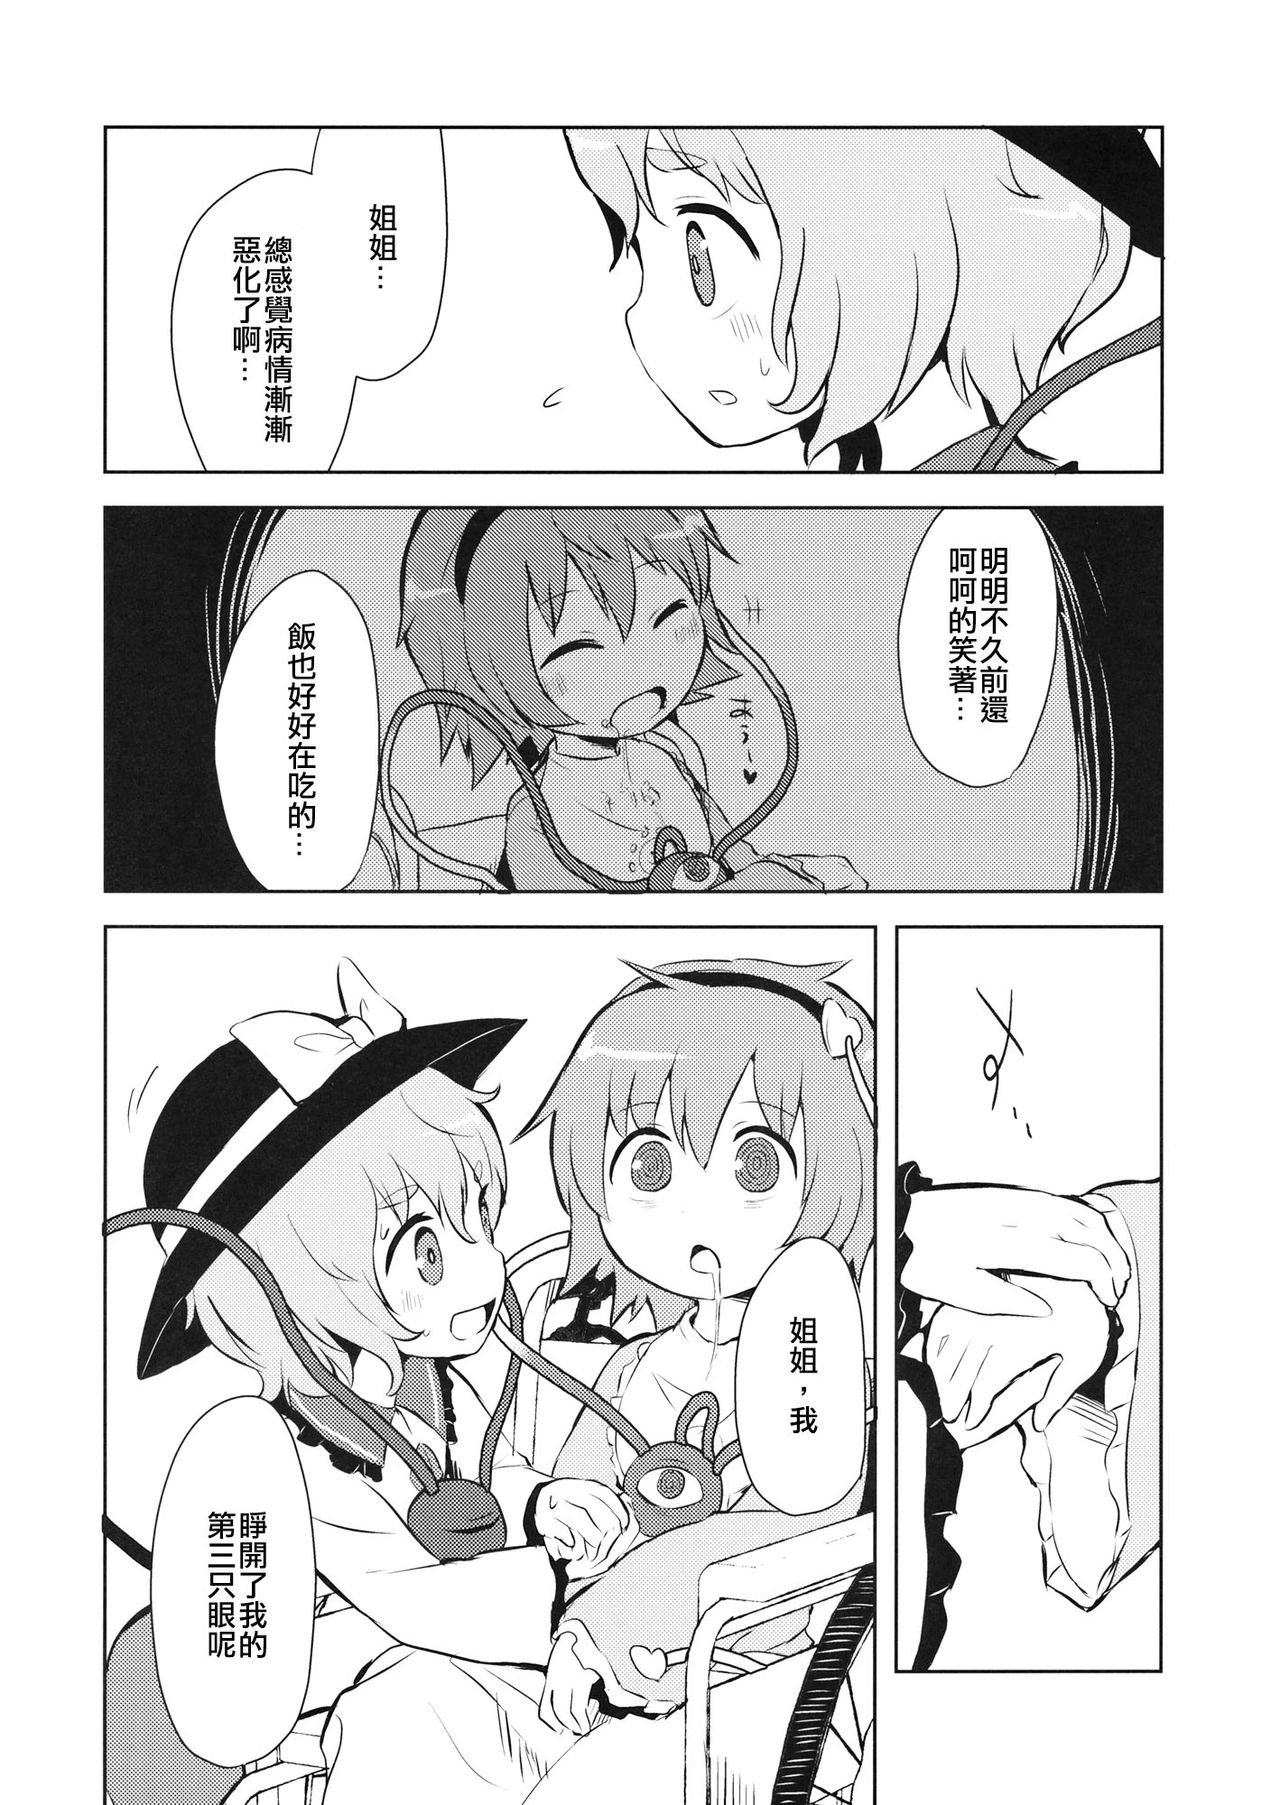 (Reitaisai 13) [02 (Harasaki)] FREAKS OUT! (Touhou Project) [Chinese] [沒有漢化] page 6 full